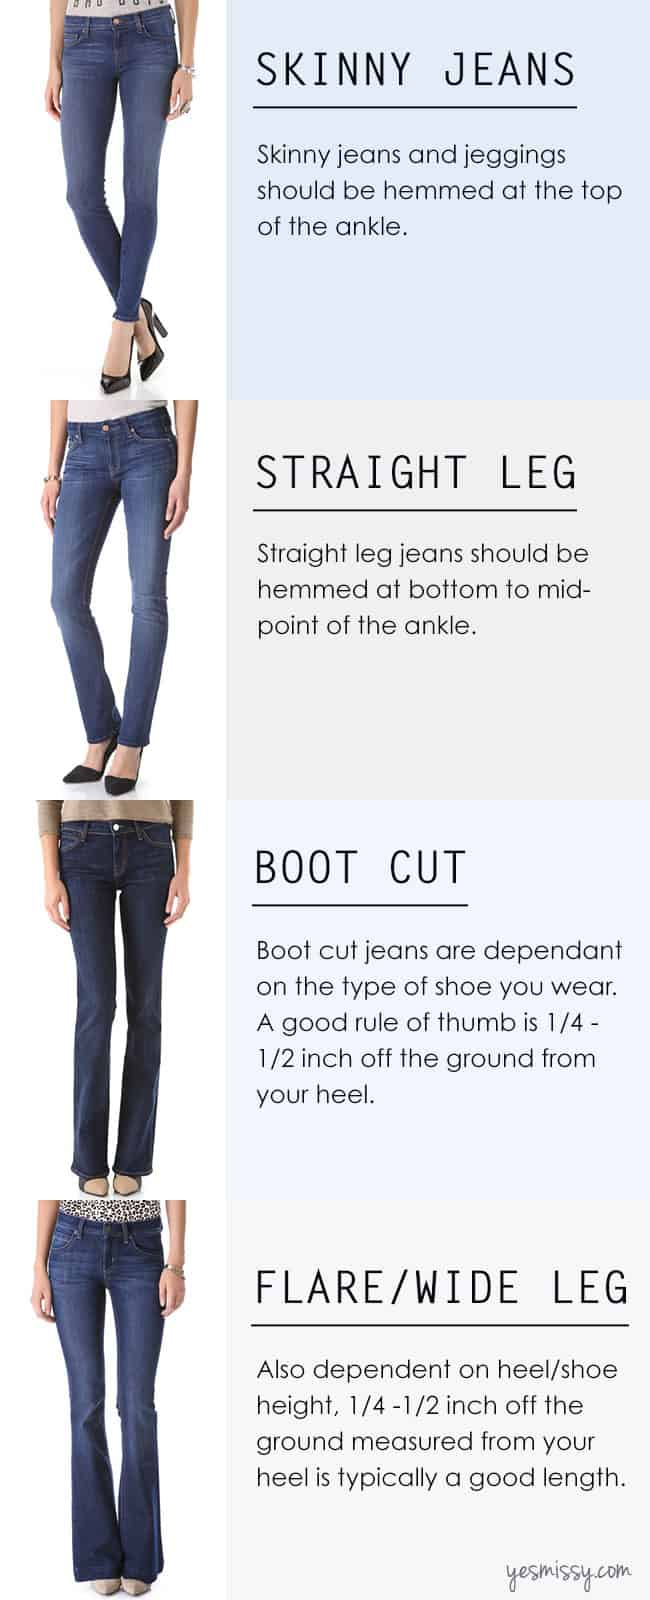 A Complete Guide On How To Hem Jeans - Yes Missy! - A Complete Guide On How To Hem Jeans - Yes Missy! -   19 style Guides clothing ideas